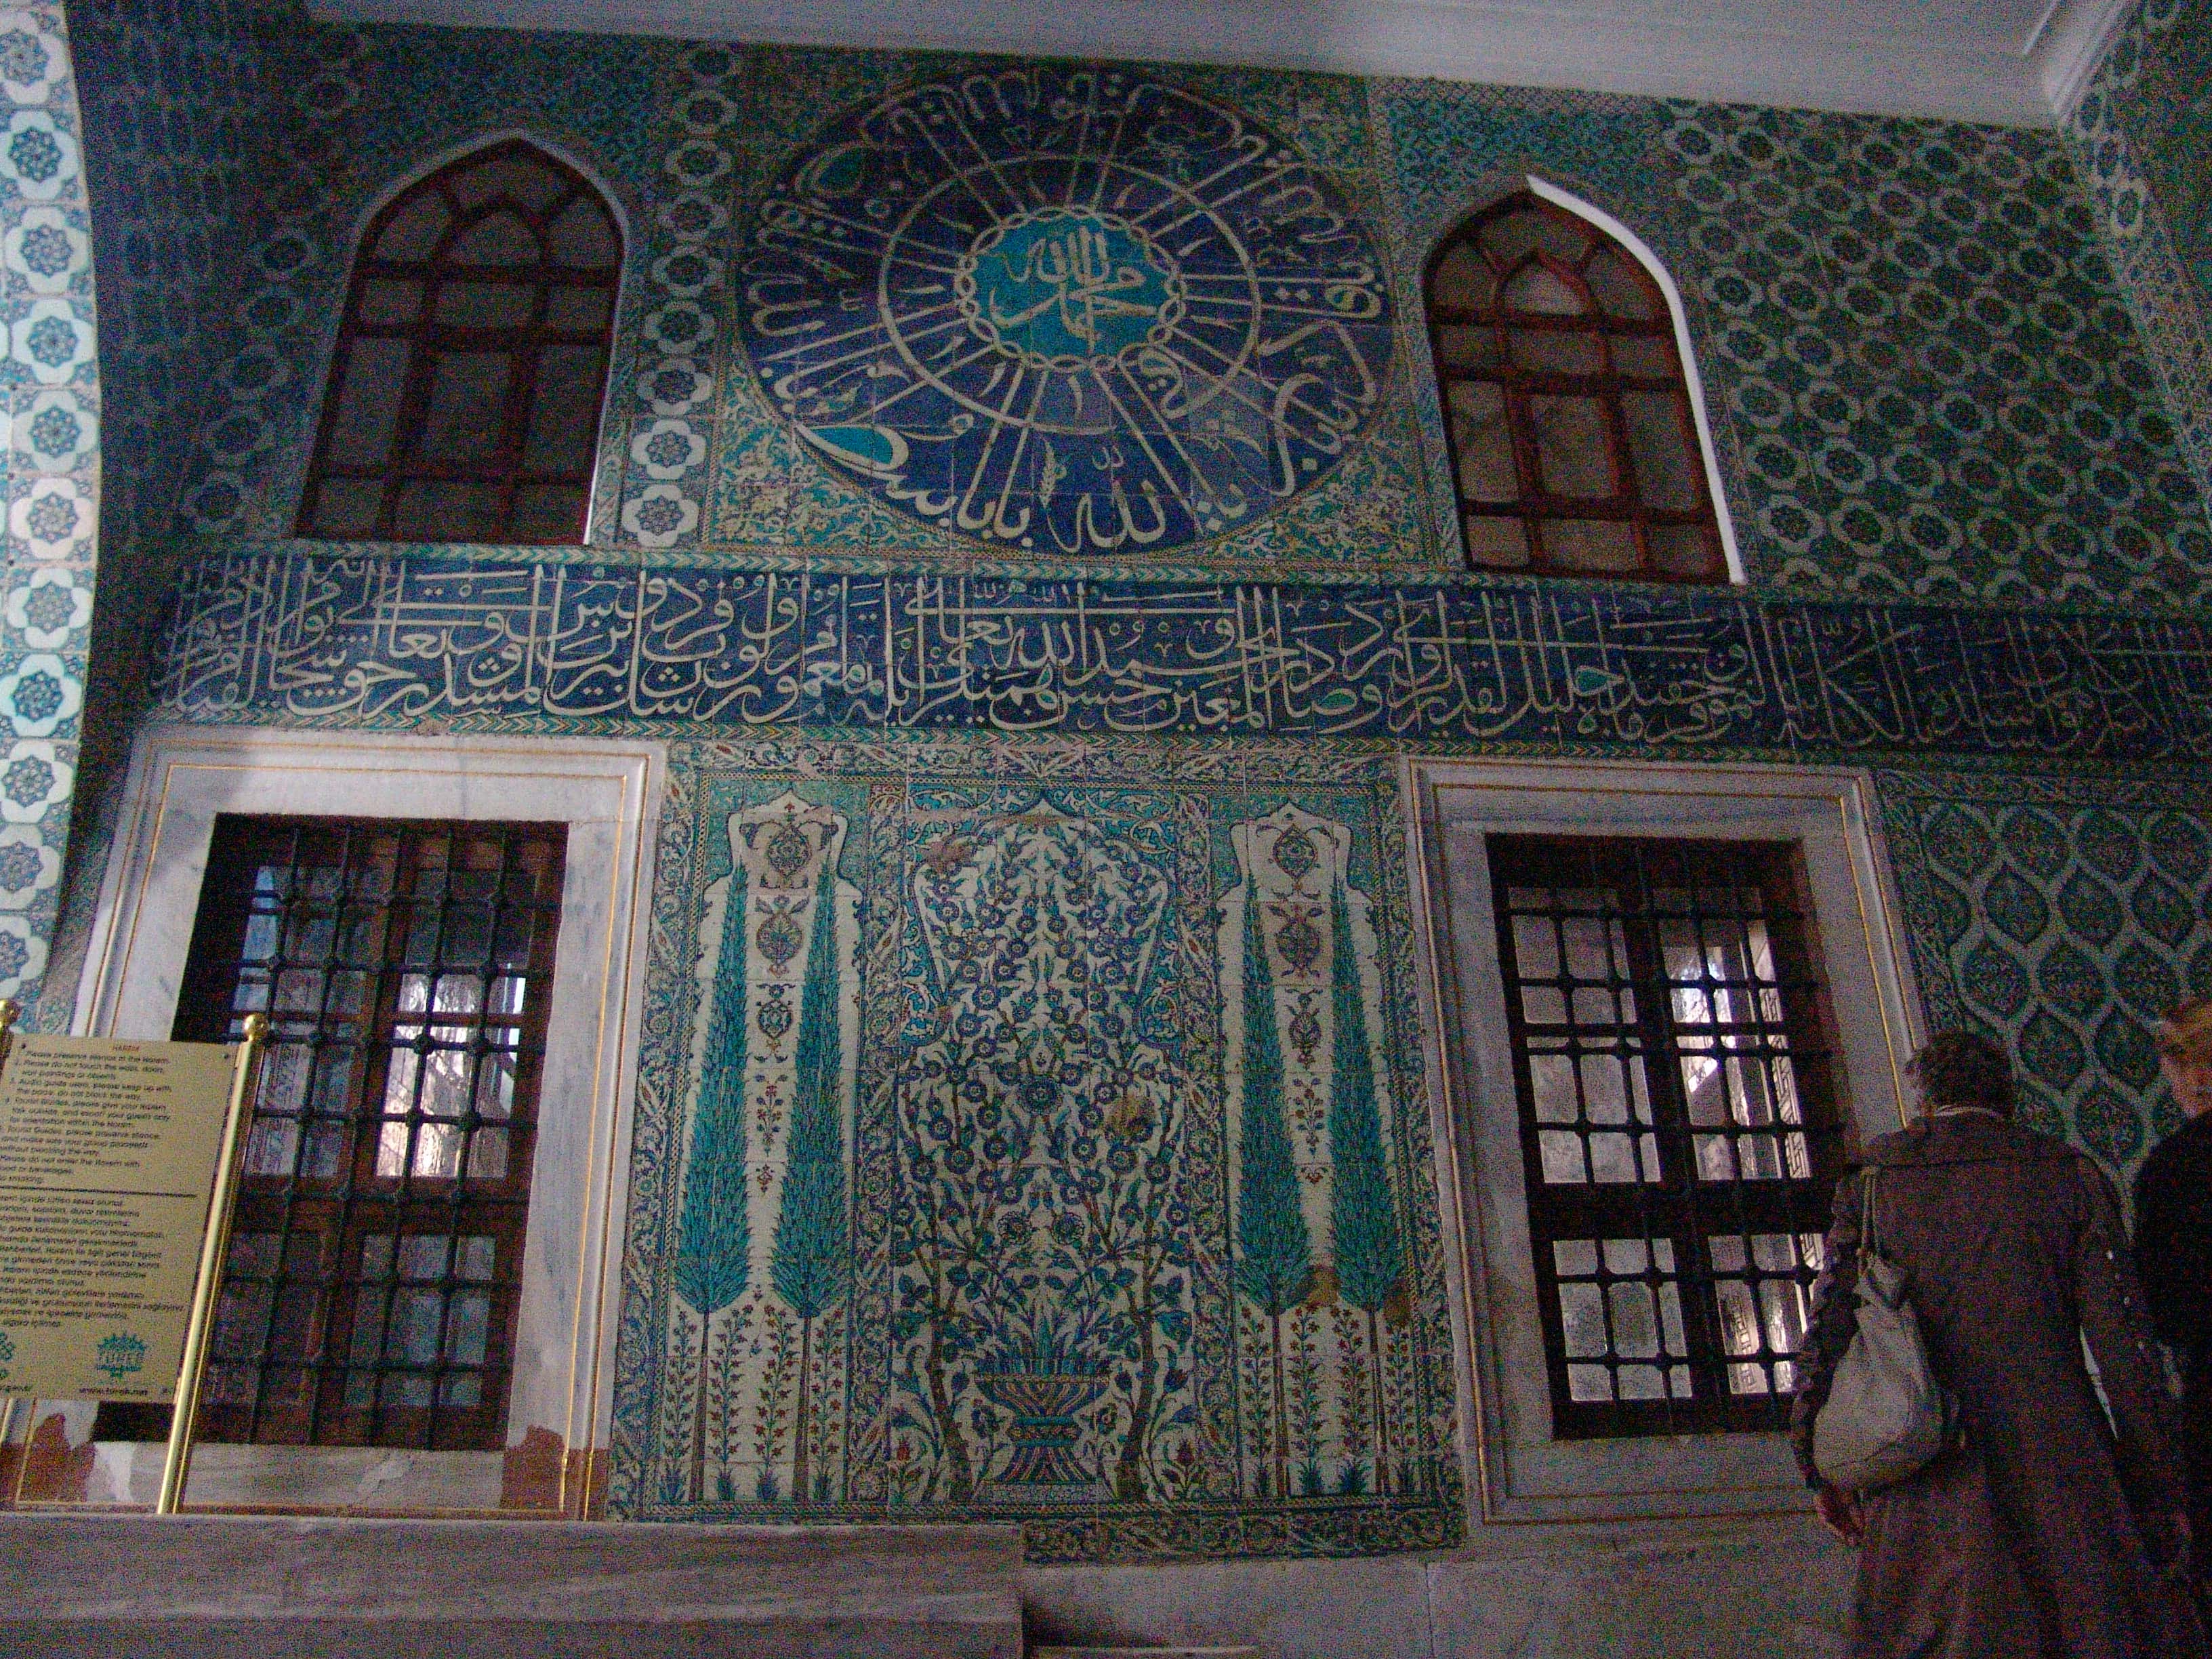 Tiles on the exterior of the Mosque of the Black Eunuchs in the Imperial Harem at Topkapi Palace in Istanbul, Turkey